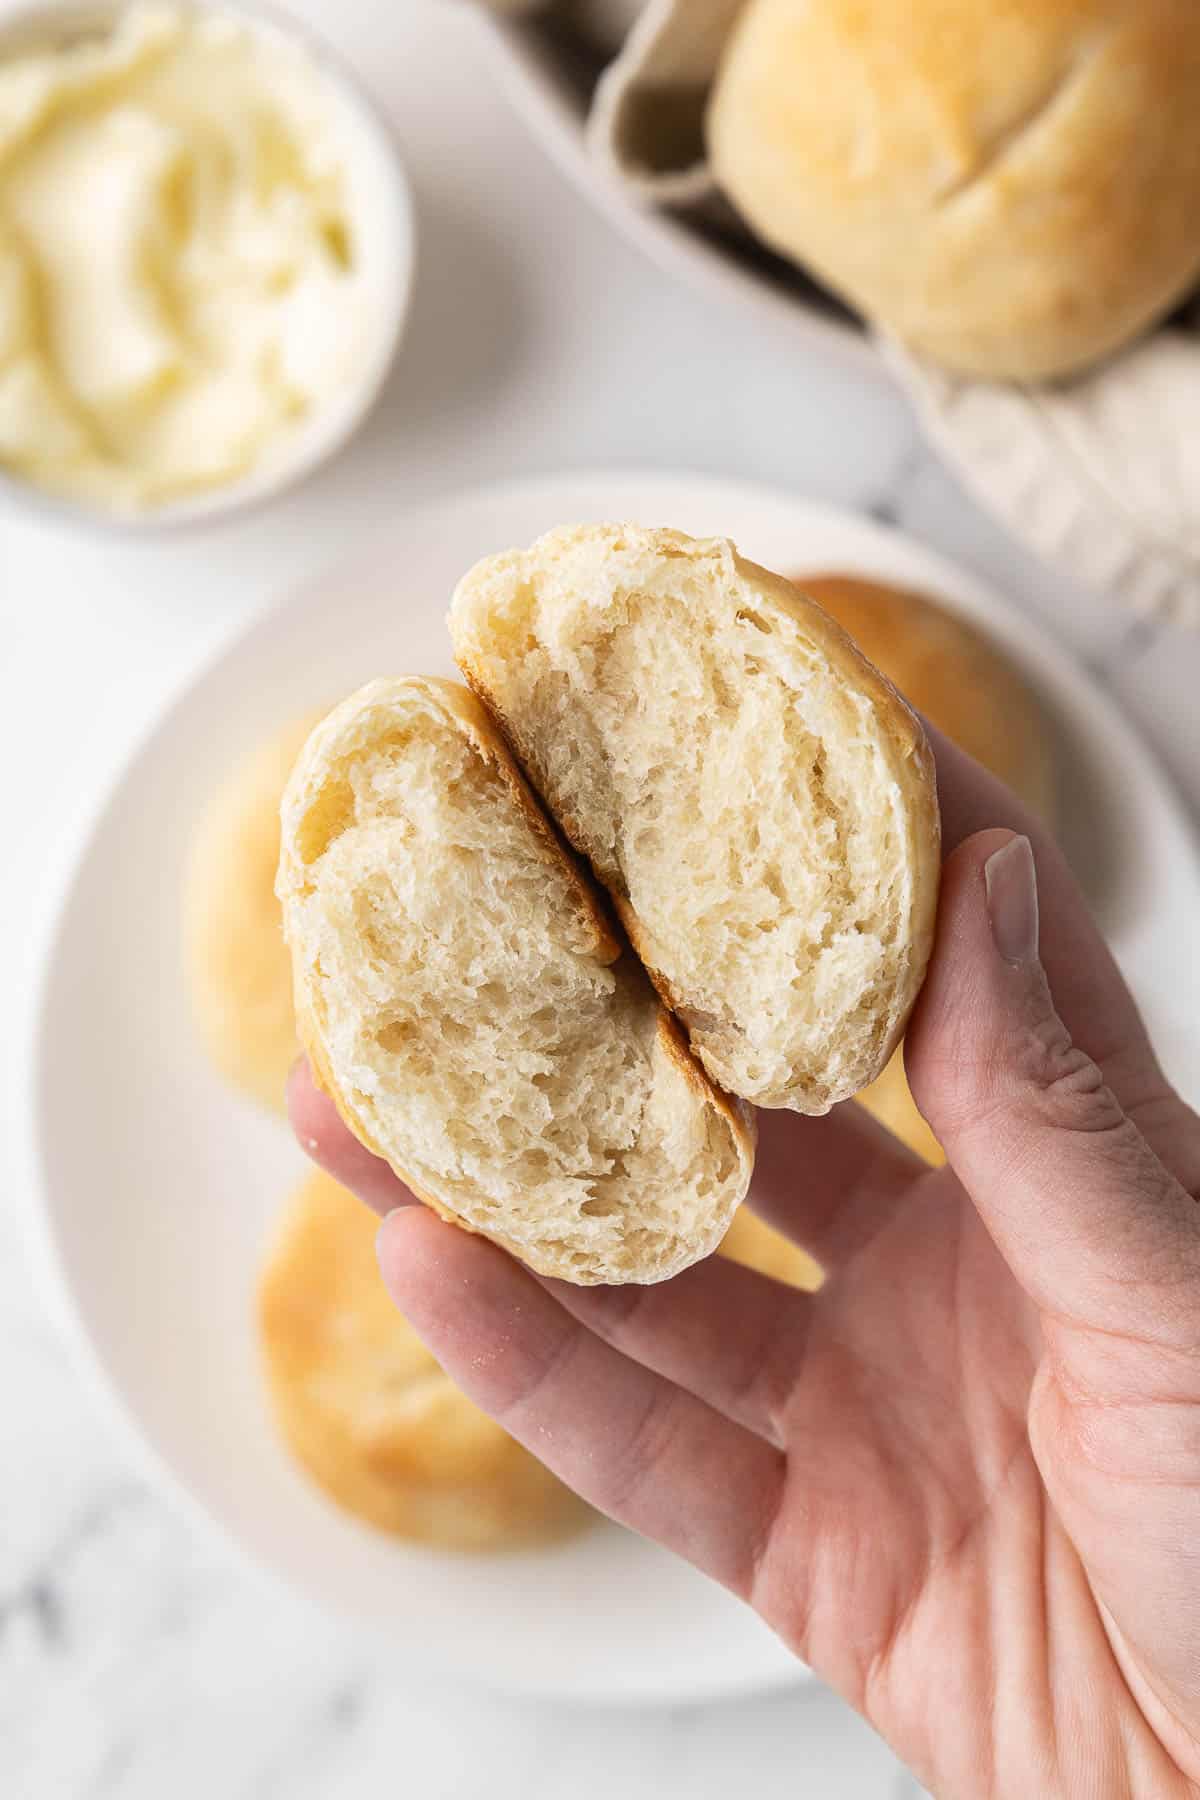 Hand holding a french bread roll that's cut in half to show the fluffy inside texture.